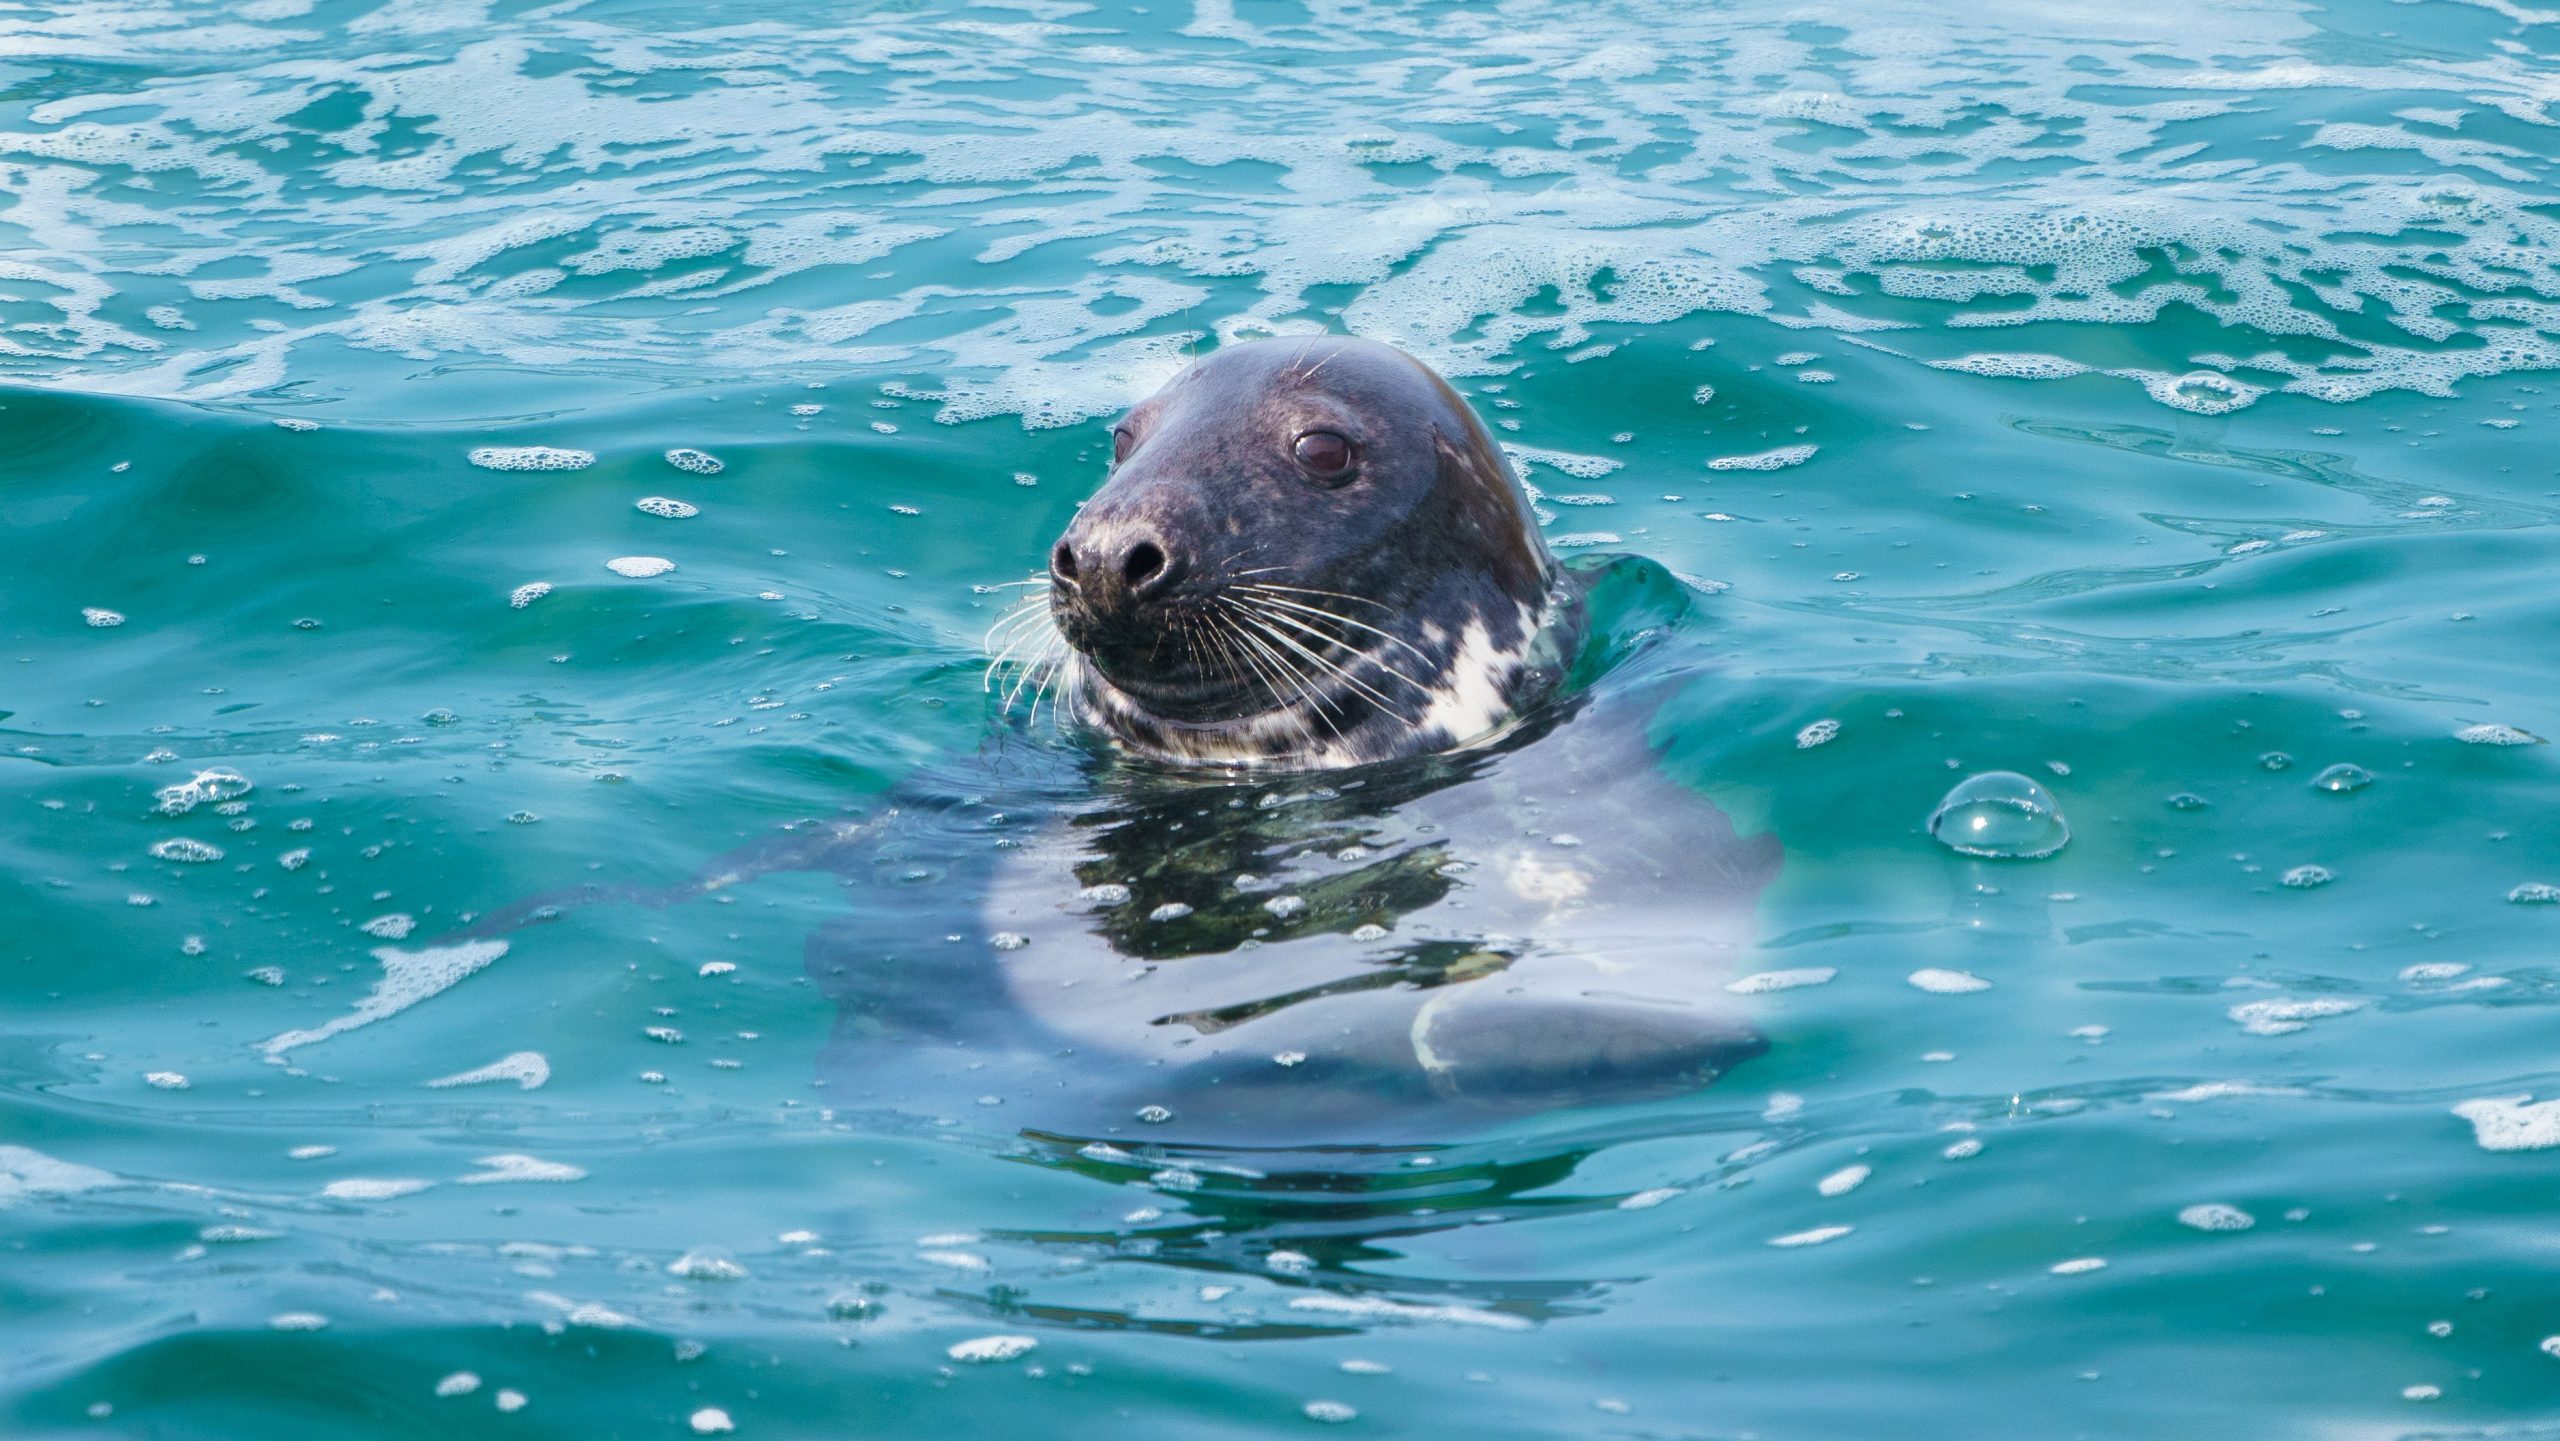 A seal in the ocean as seen from a boat trip in St Ives